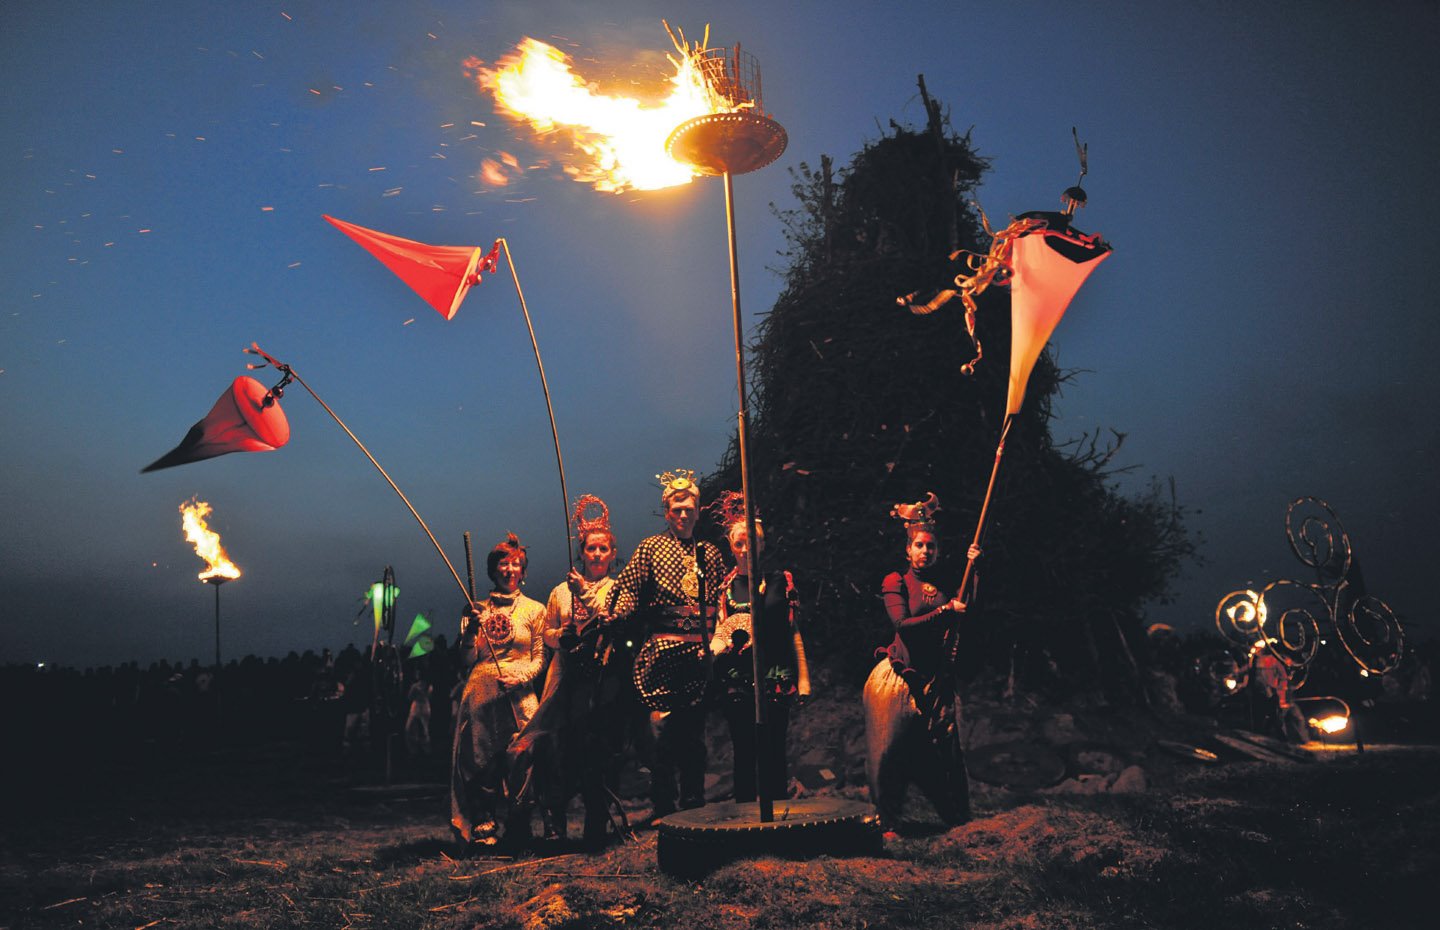 Bealtaine Fire Festival, Hill of Uisneach. At night, people in costume holding tall flags and flames are by a tall bush outdoors